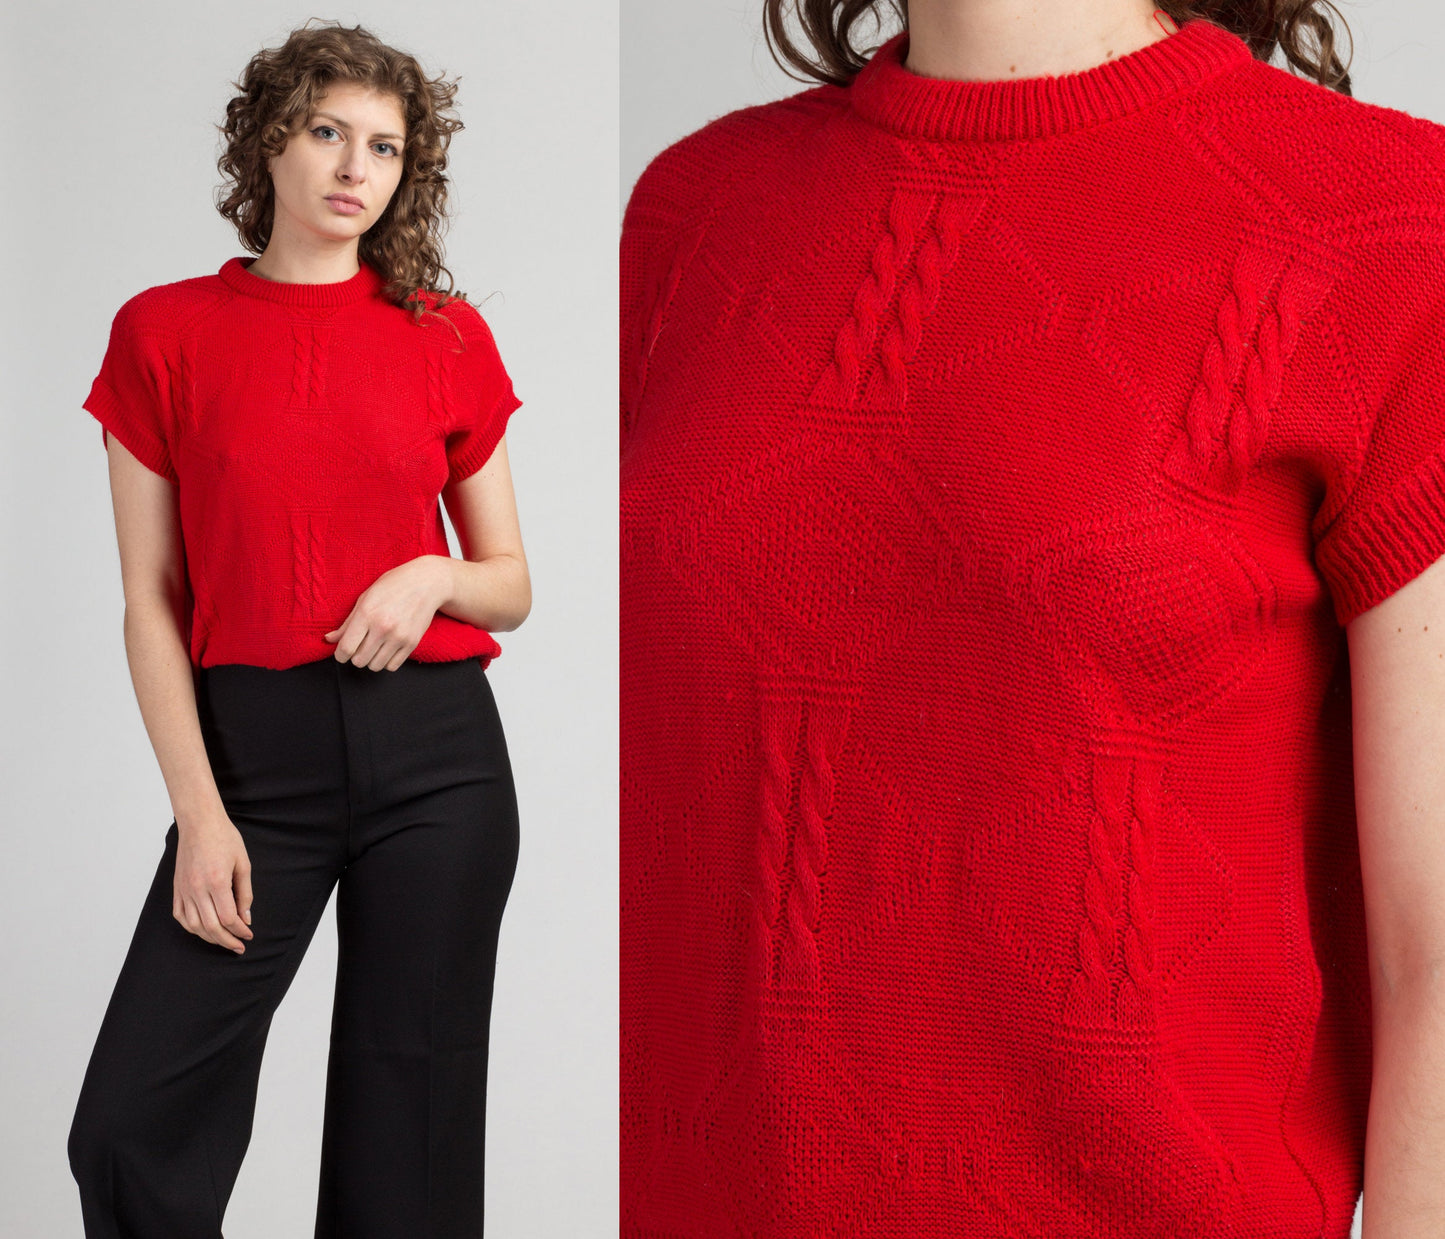 Vintage Red Cable Knit Top - Small to Medium | 80s Plain Cap Sleeve Knit Sweater